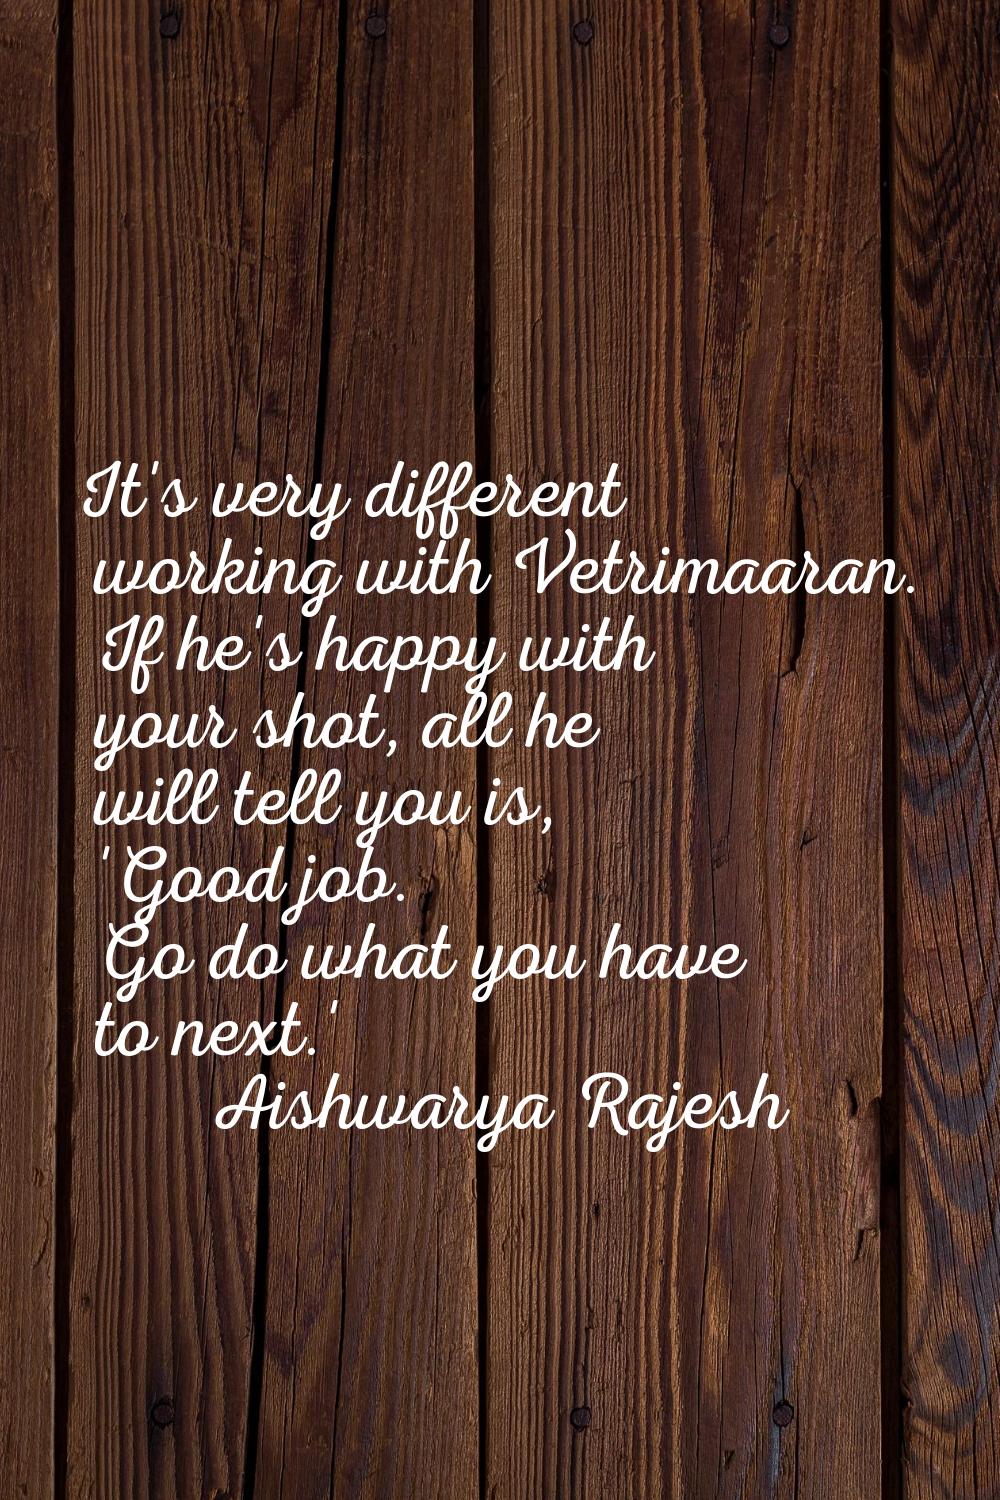 It's very different working with Vetrimaaran. If he's happy with your shot, all he will tell you is